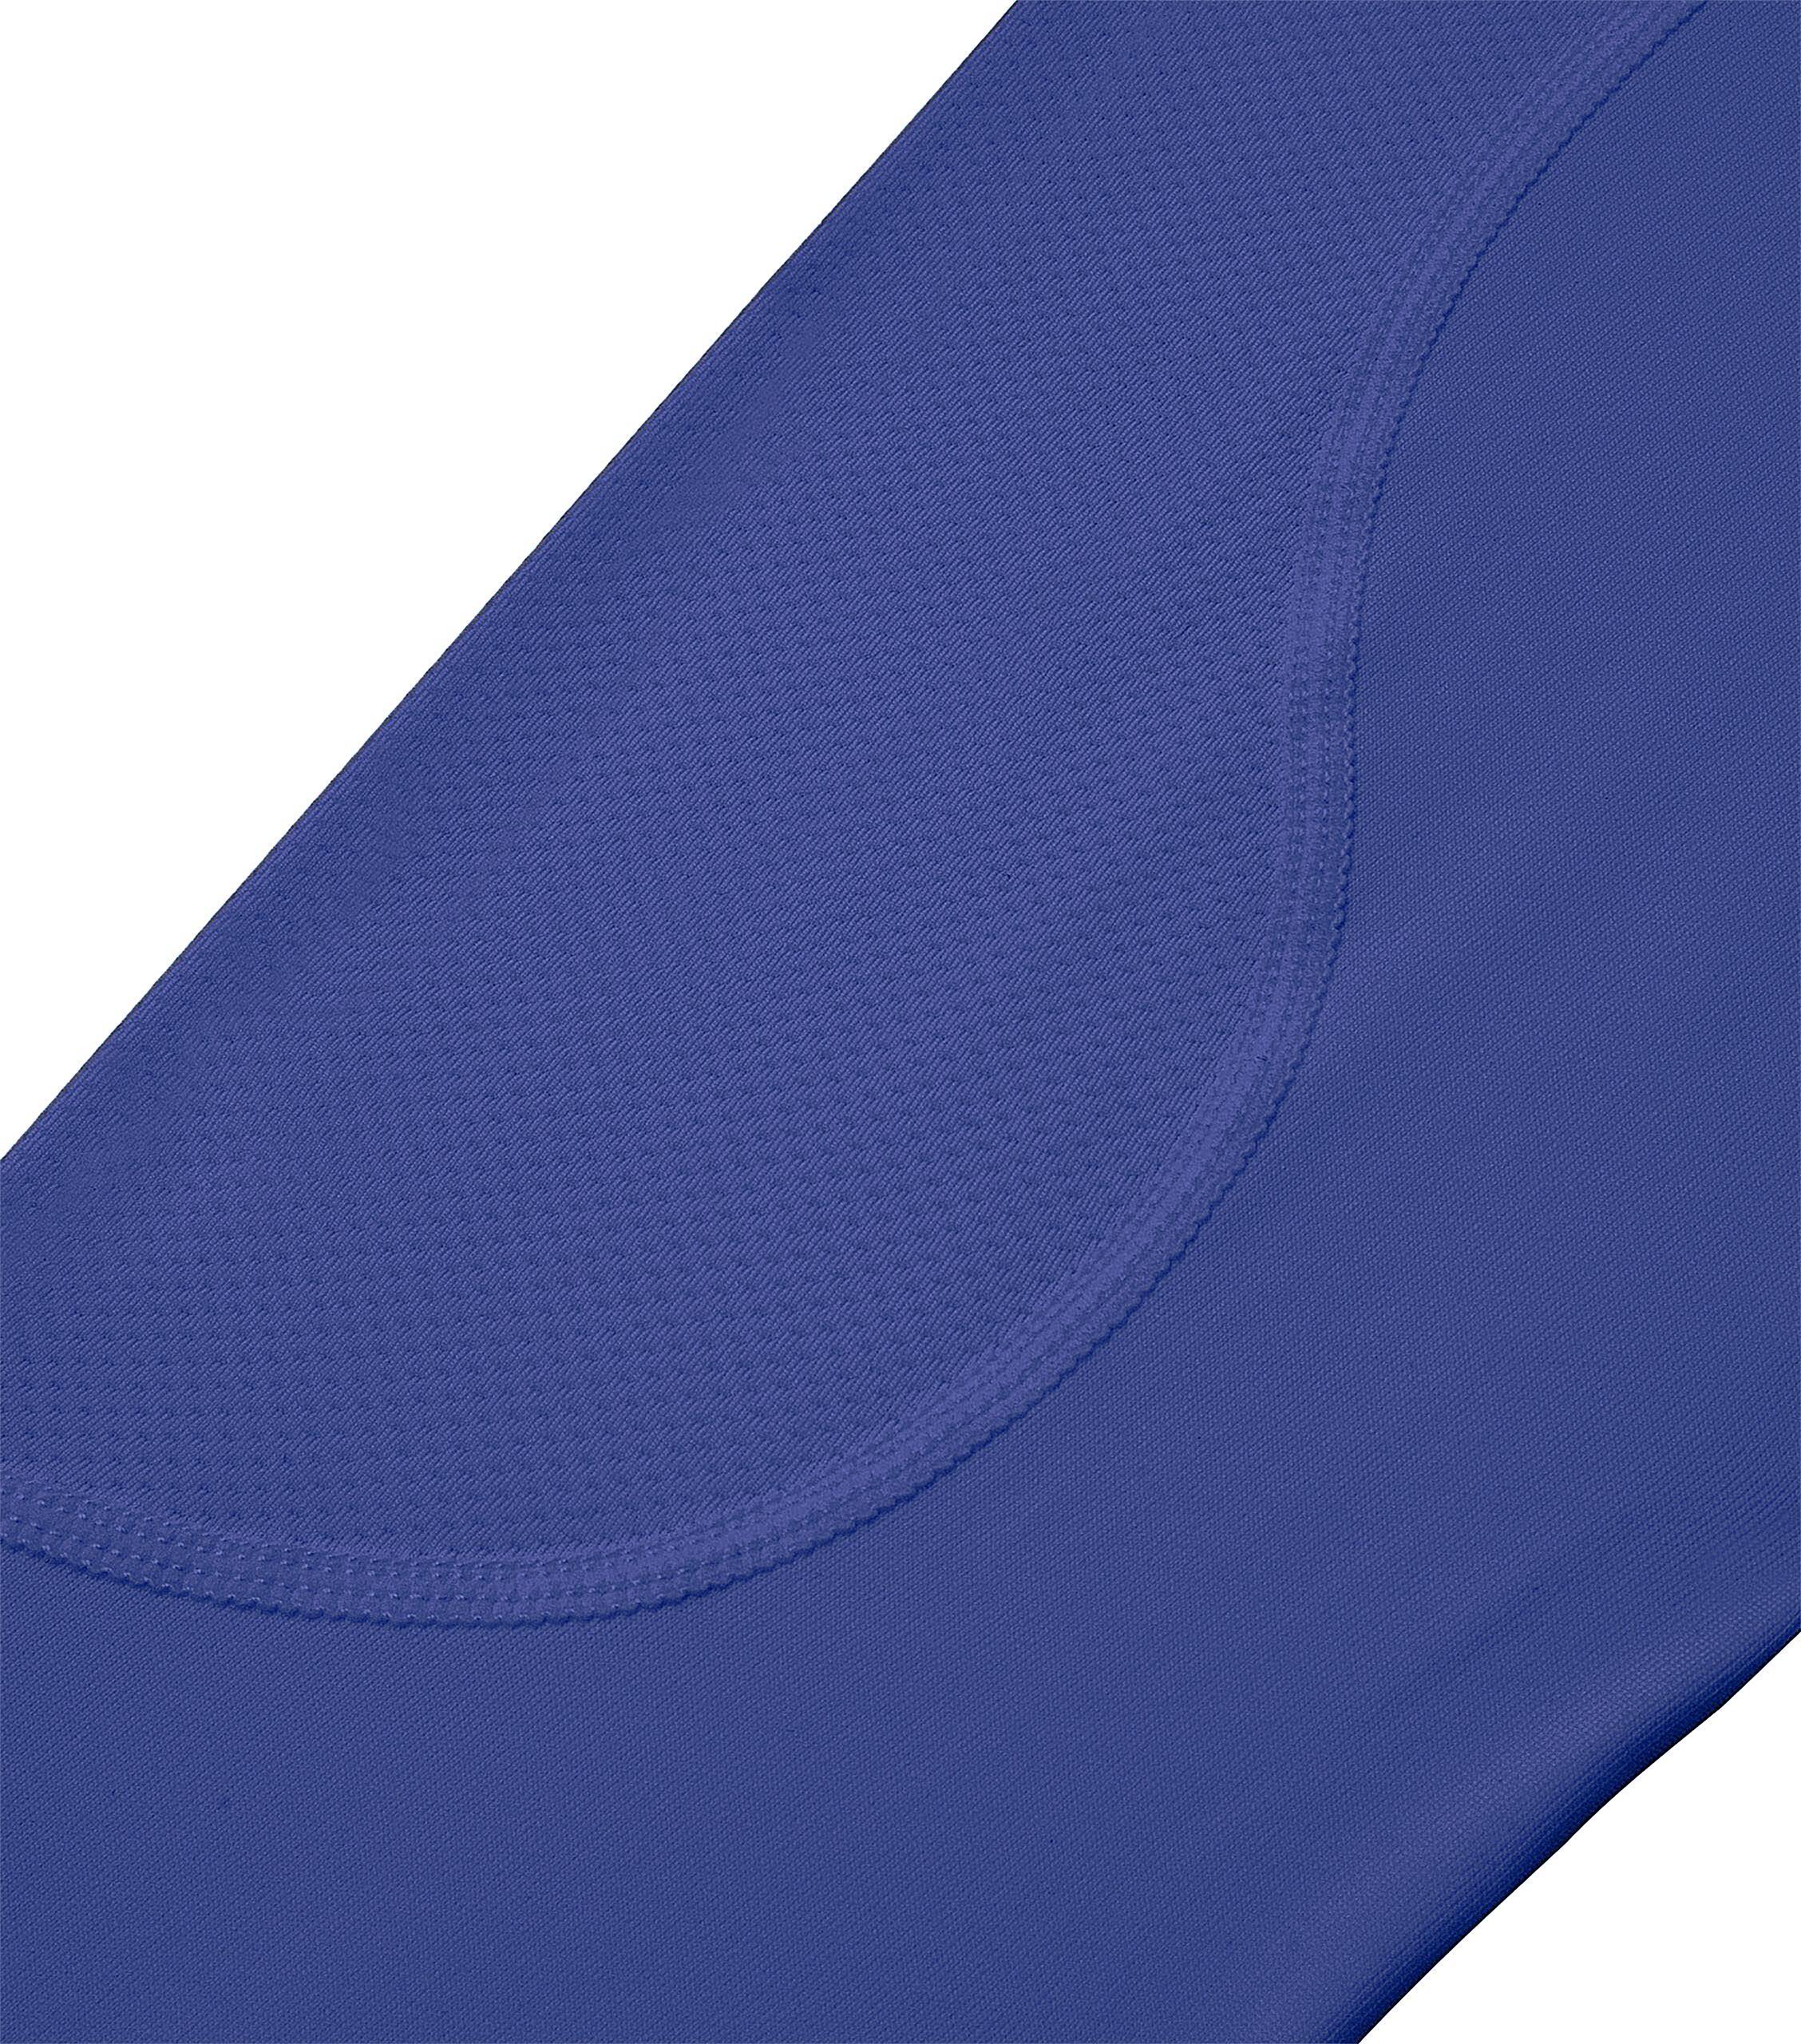 Men's HyperFusion Breathable Base Layer Compression Top - Dazzling Blue 4/5